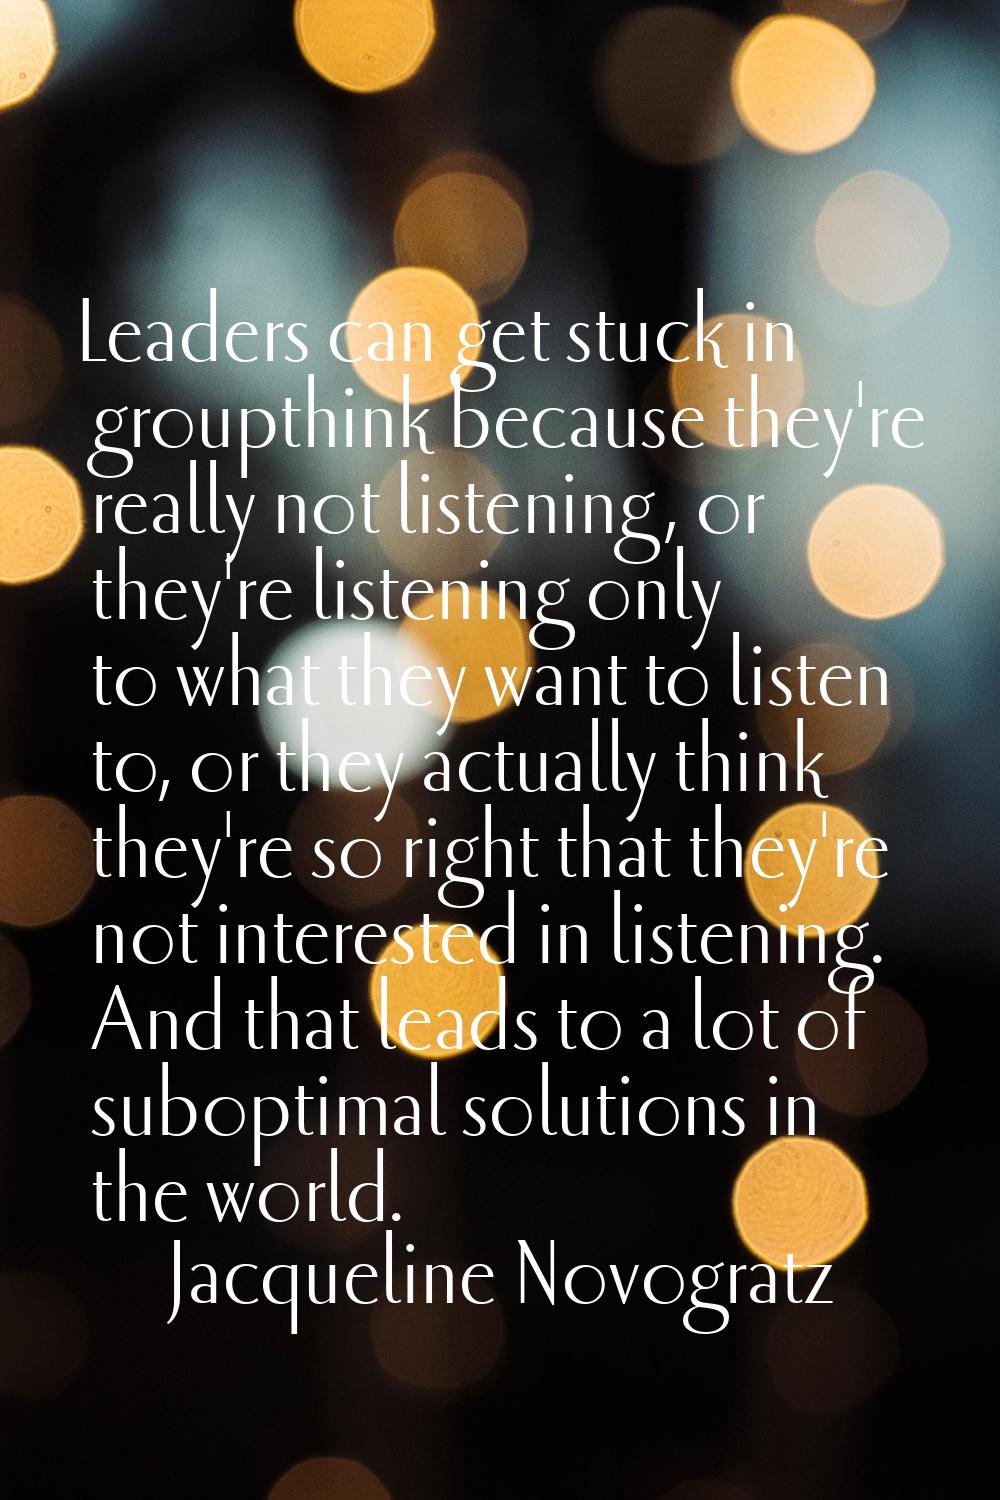 Leaders can get stuck in groupthink because they're really not listening, or they're listening only